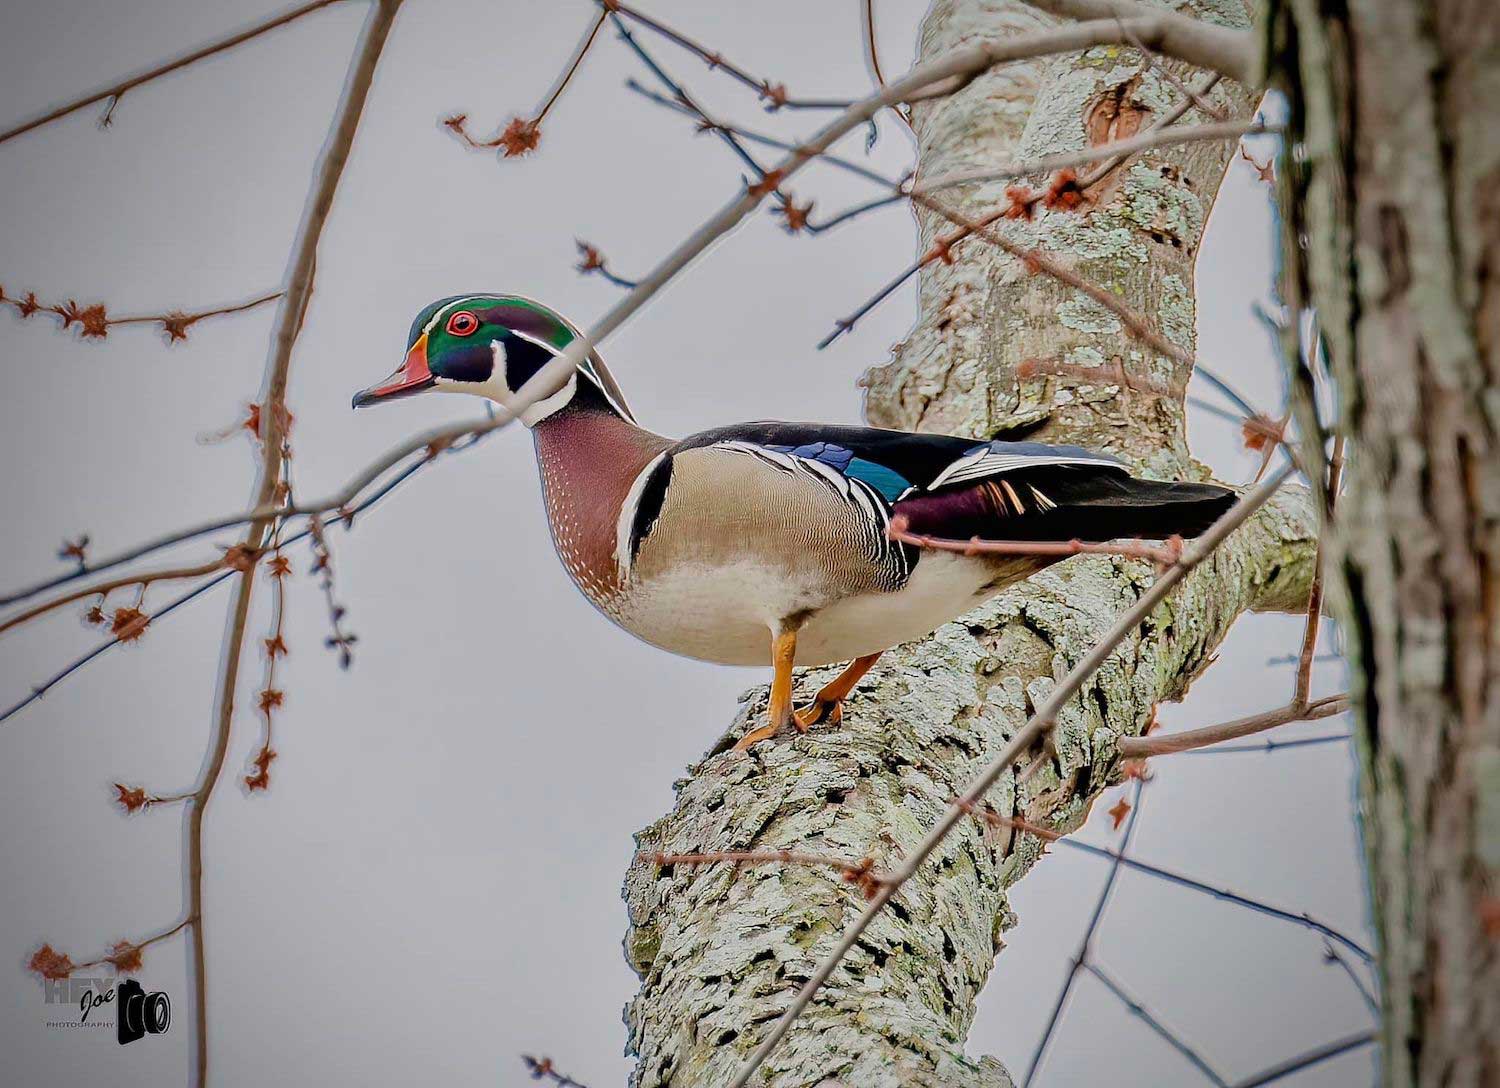 Five fast facts about ornate wood ducks